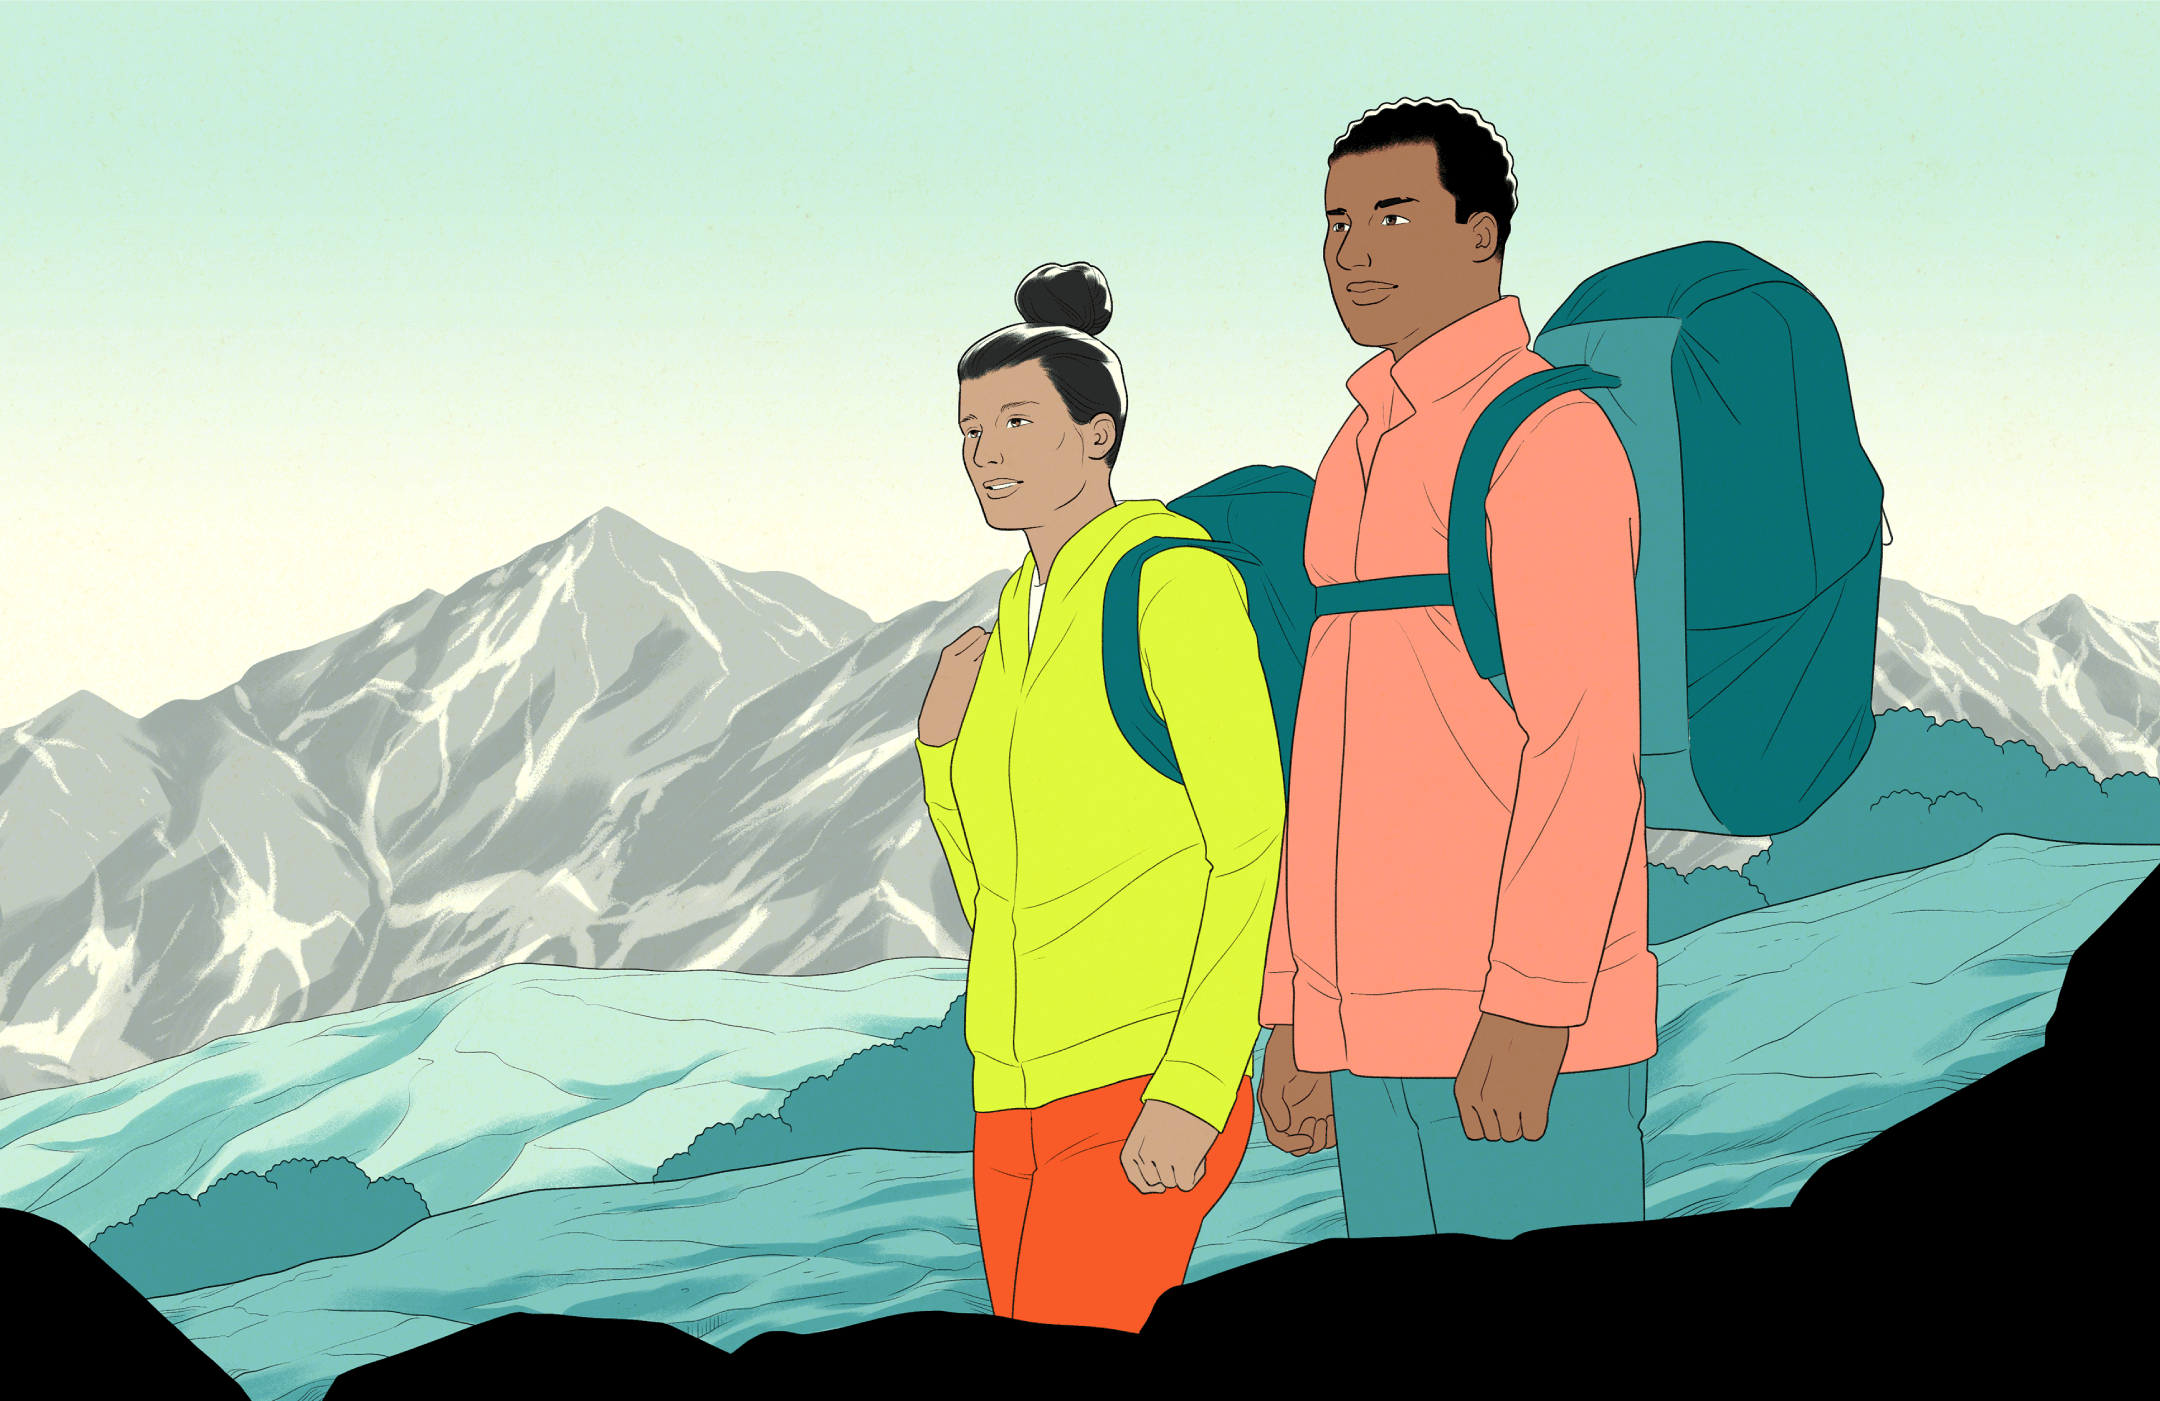 Illustration of two people hiking